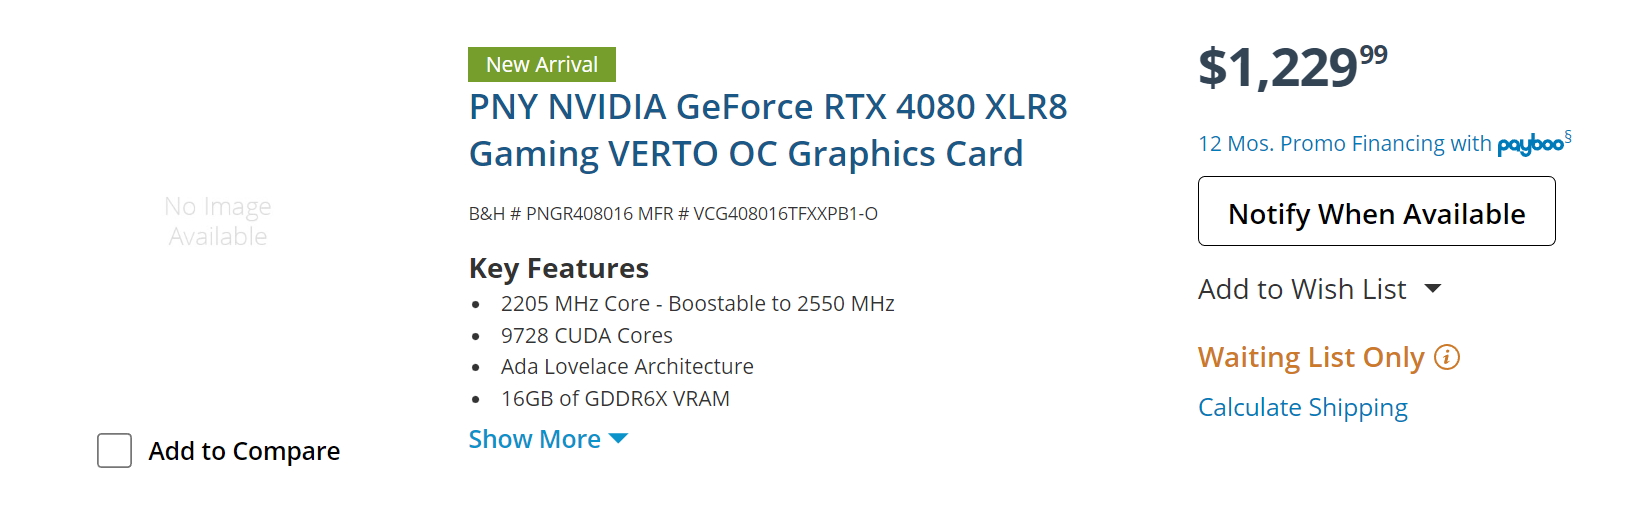 Screenshot of B&H website showing where to buy RTX 4080, notify when available